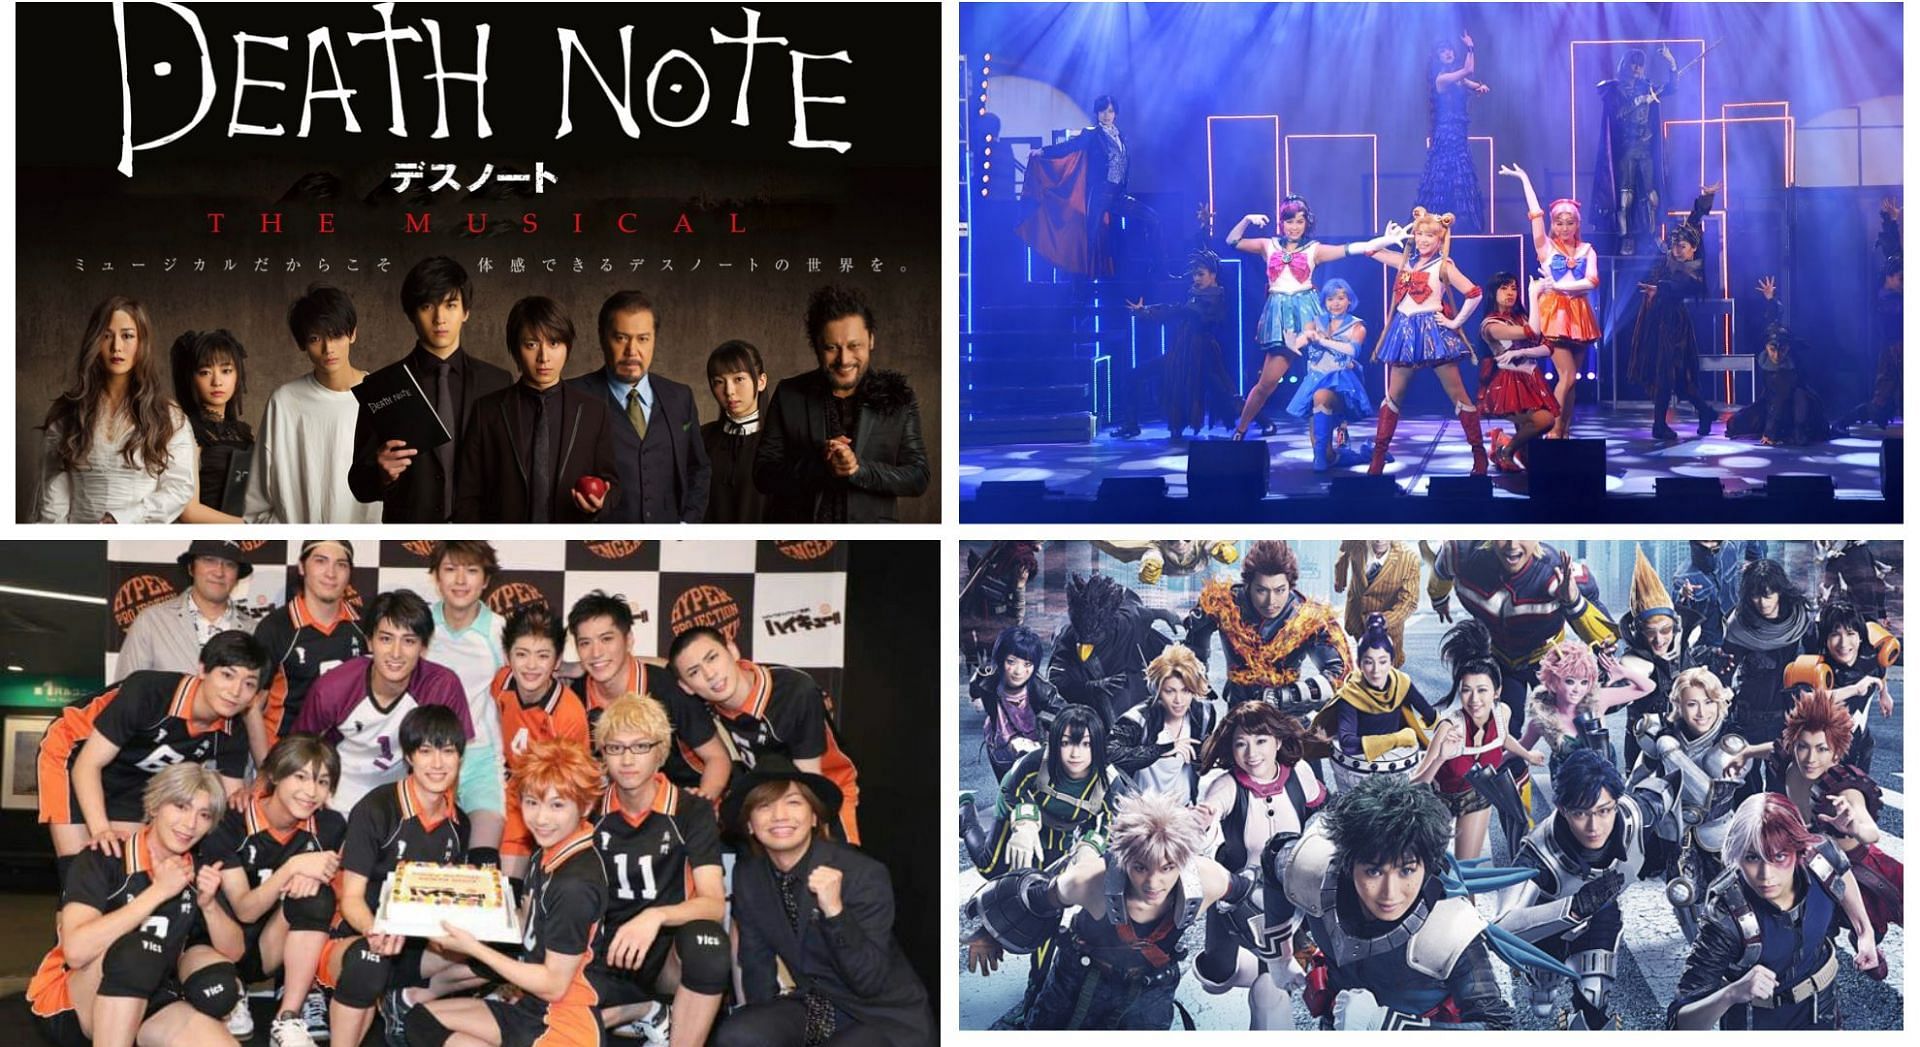 I will introduce you to the wonderful world of anime live action musicals.  | NeoGAF